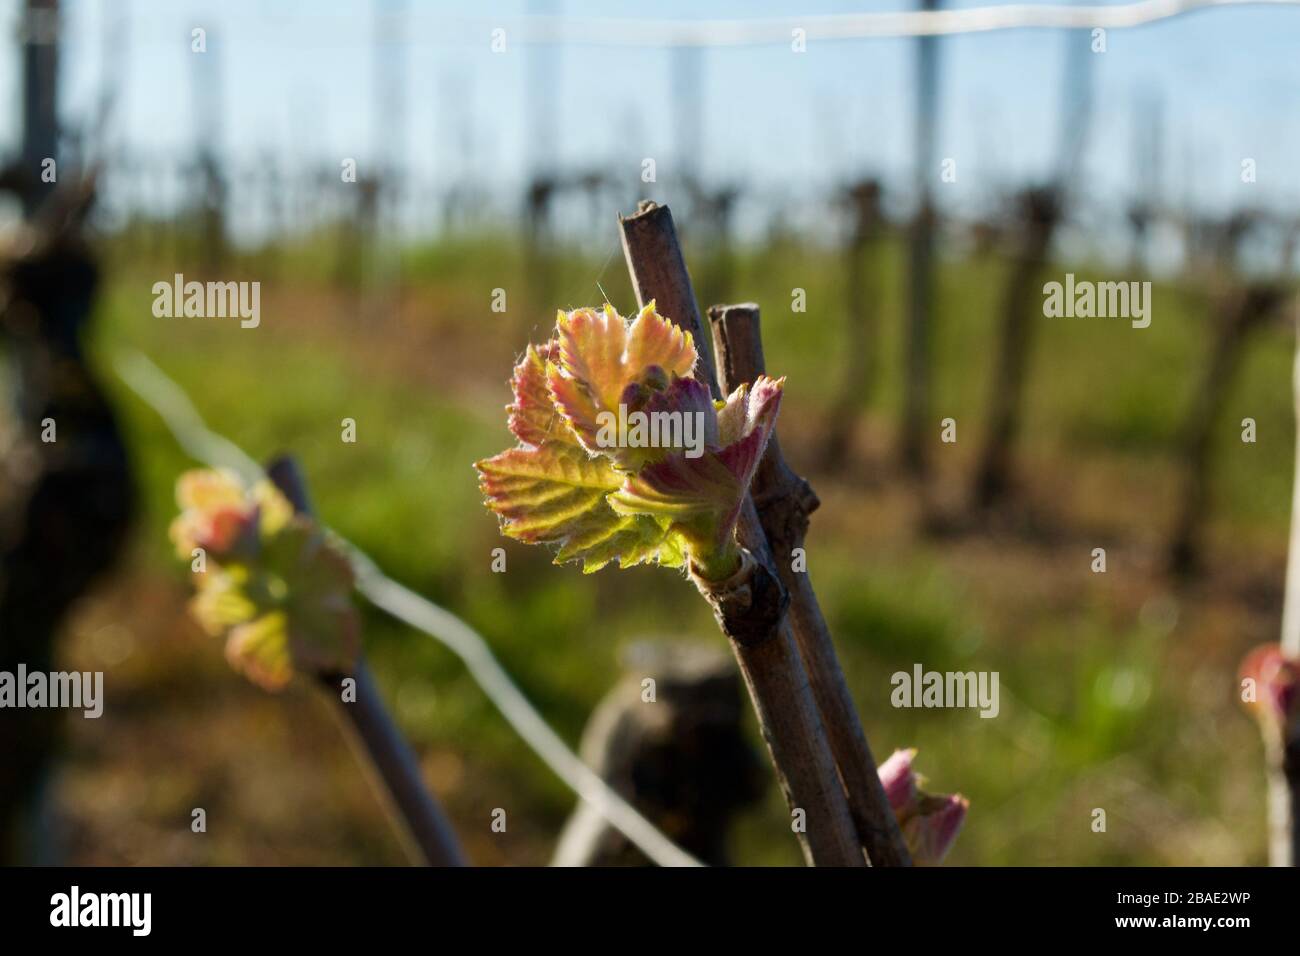 New shoots on vines in early spring in a vineyard in the Cotes de Duras AOC, France. Stock Photo